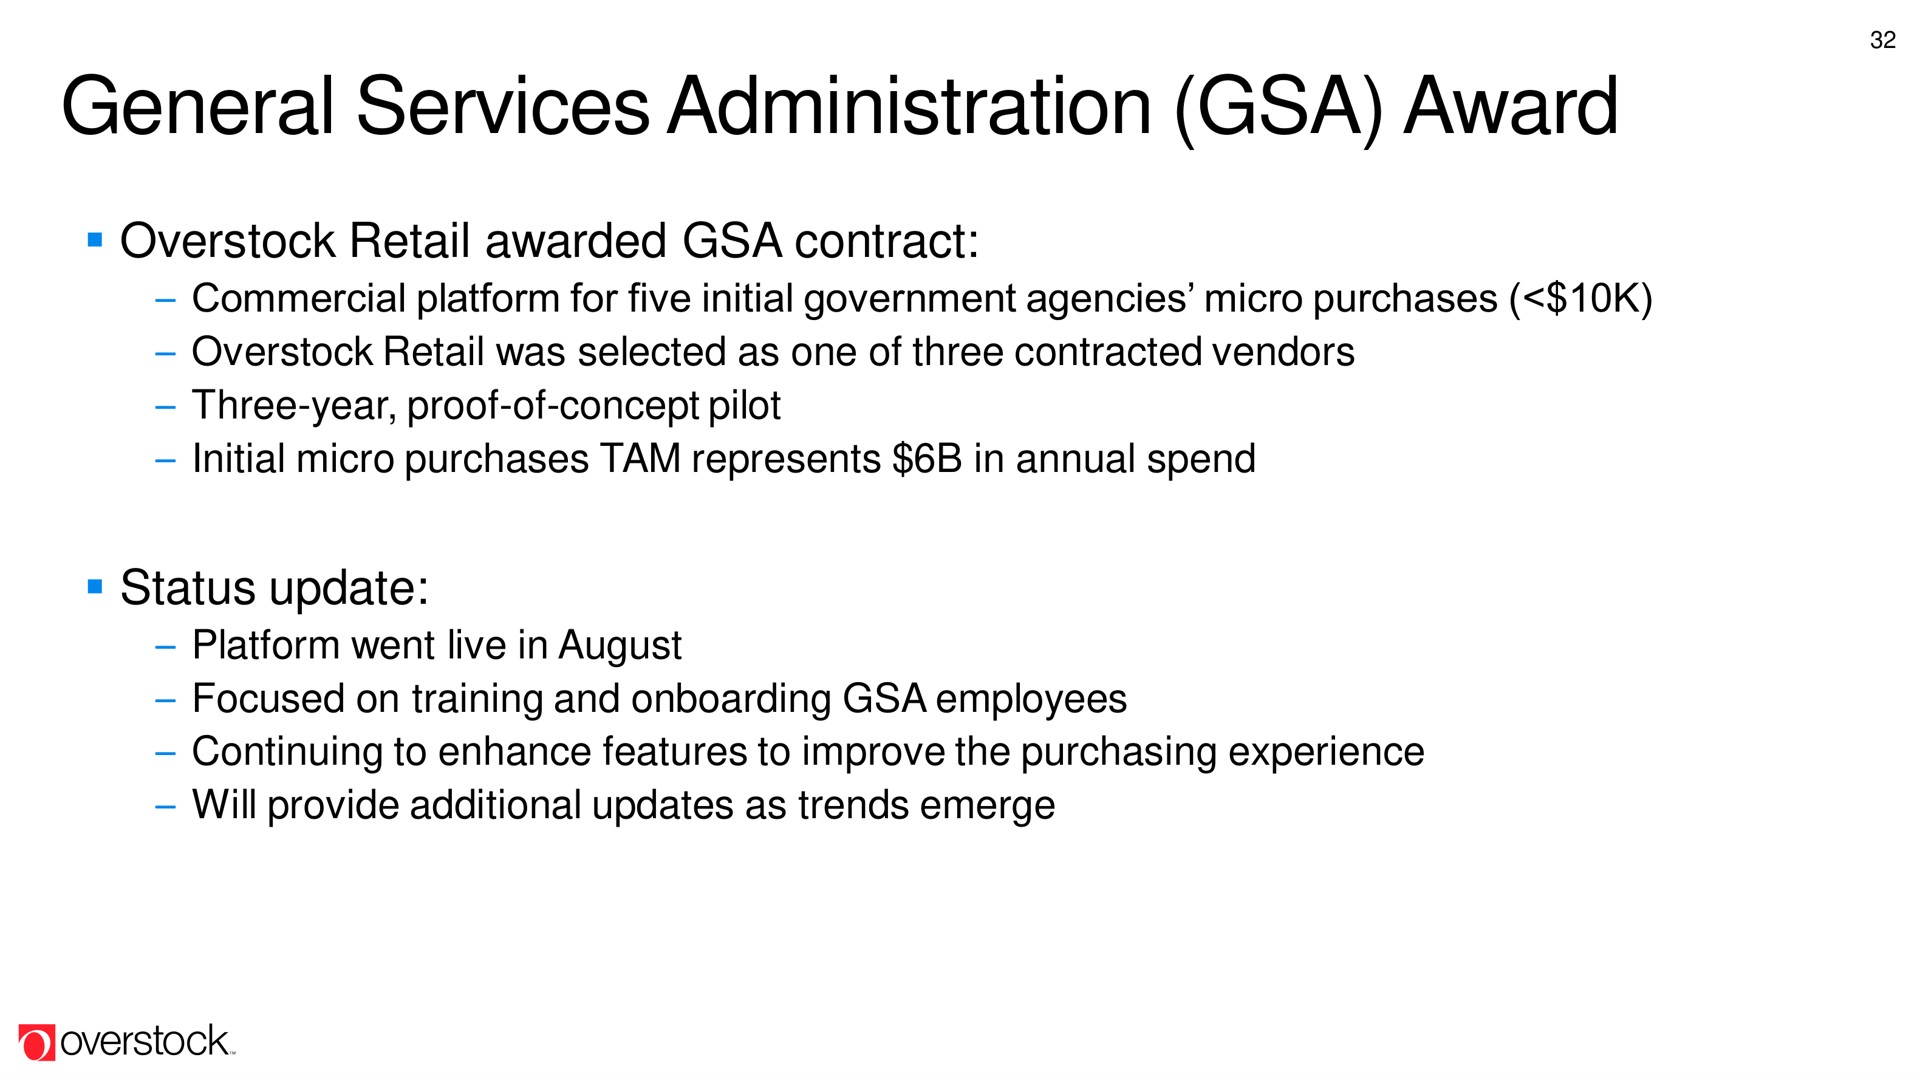 general services administration award | Overstock